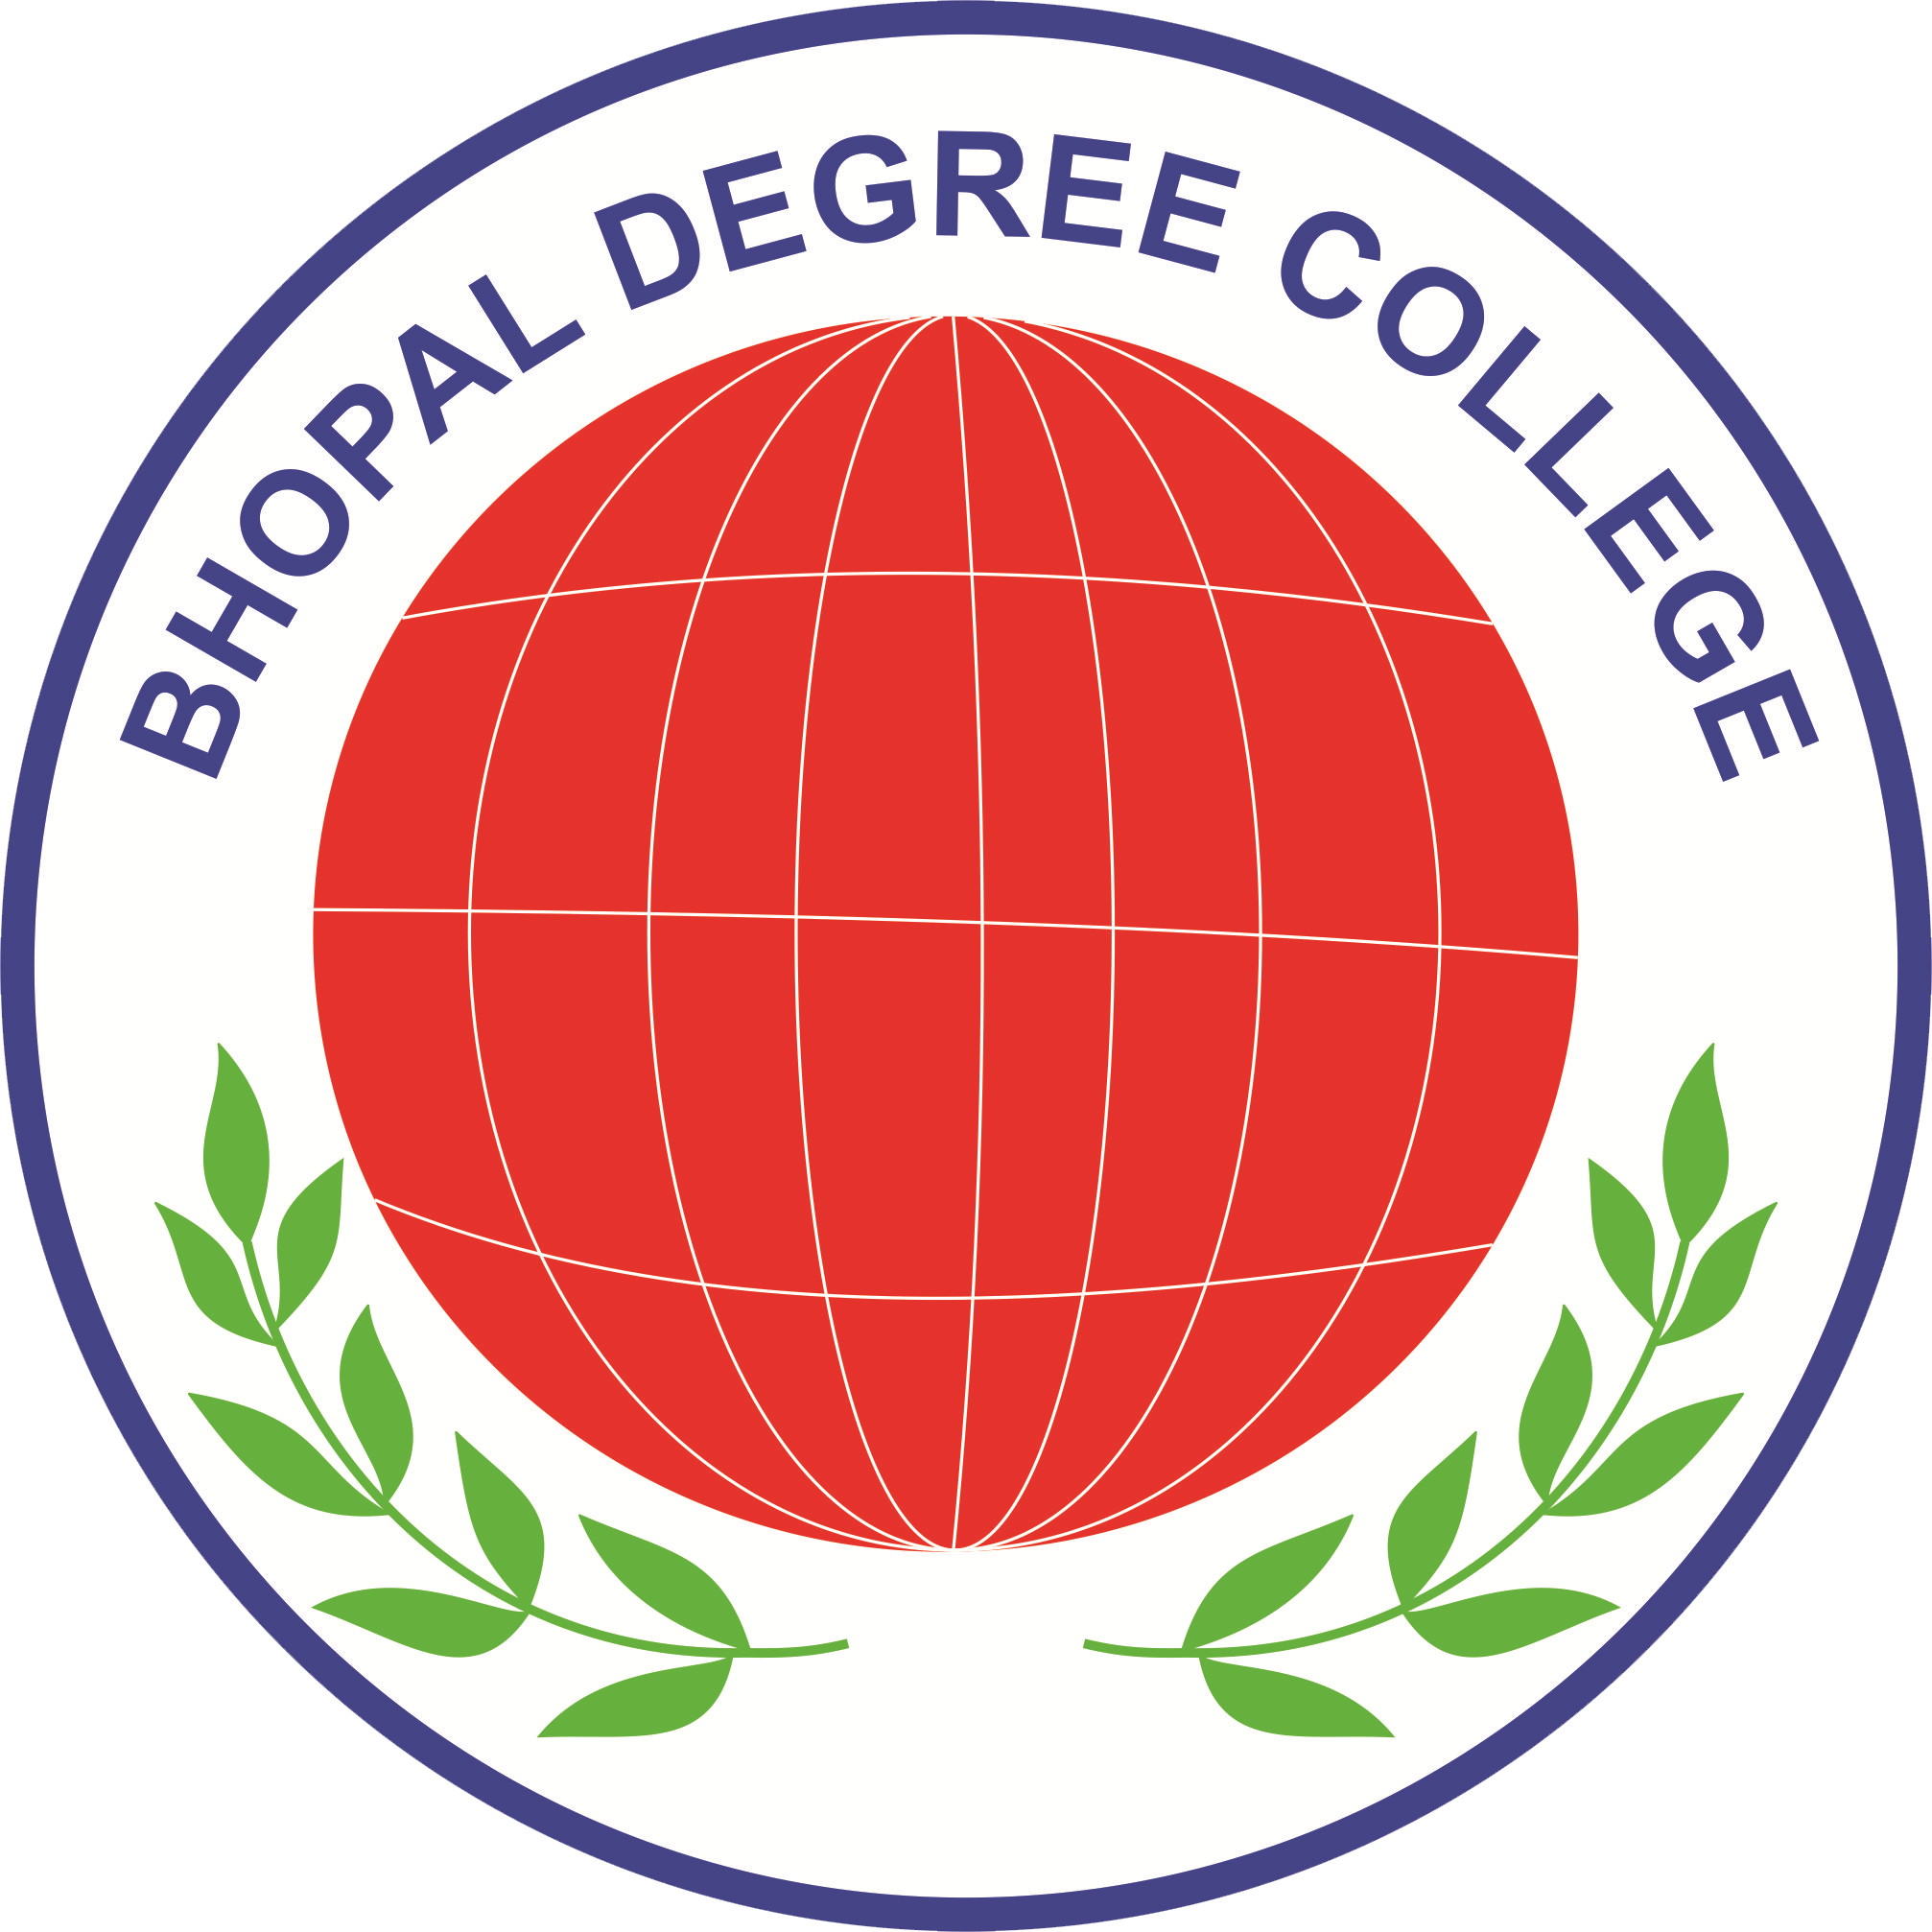 Bhopal Degree College|Colleges|Education